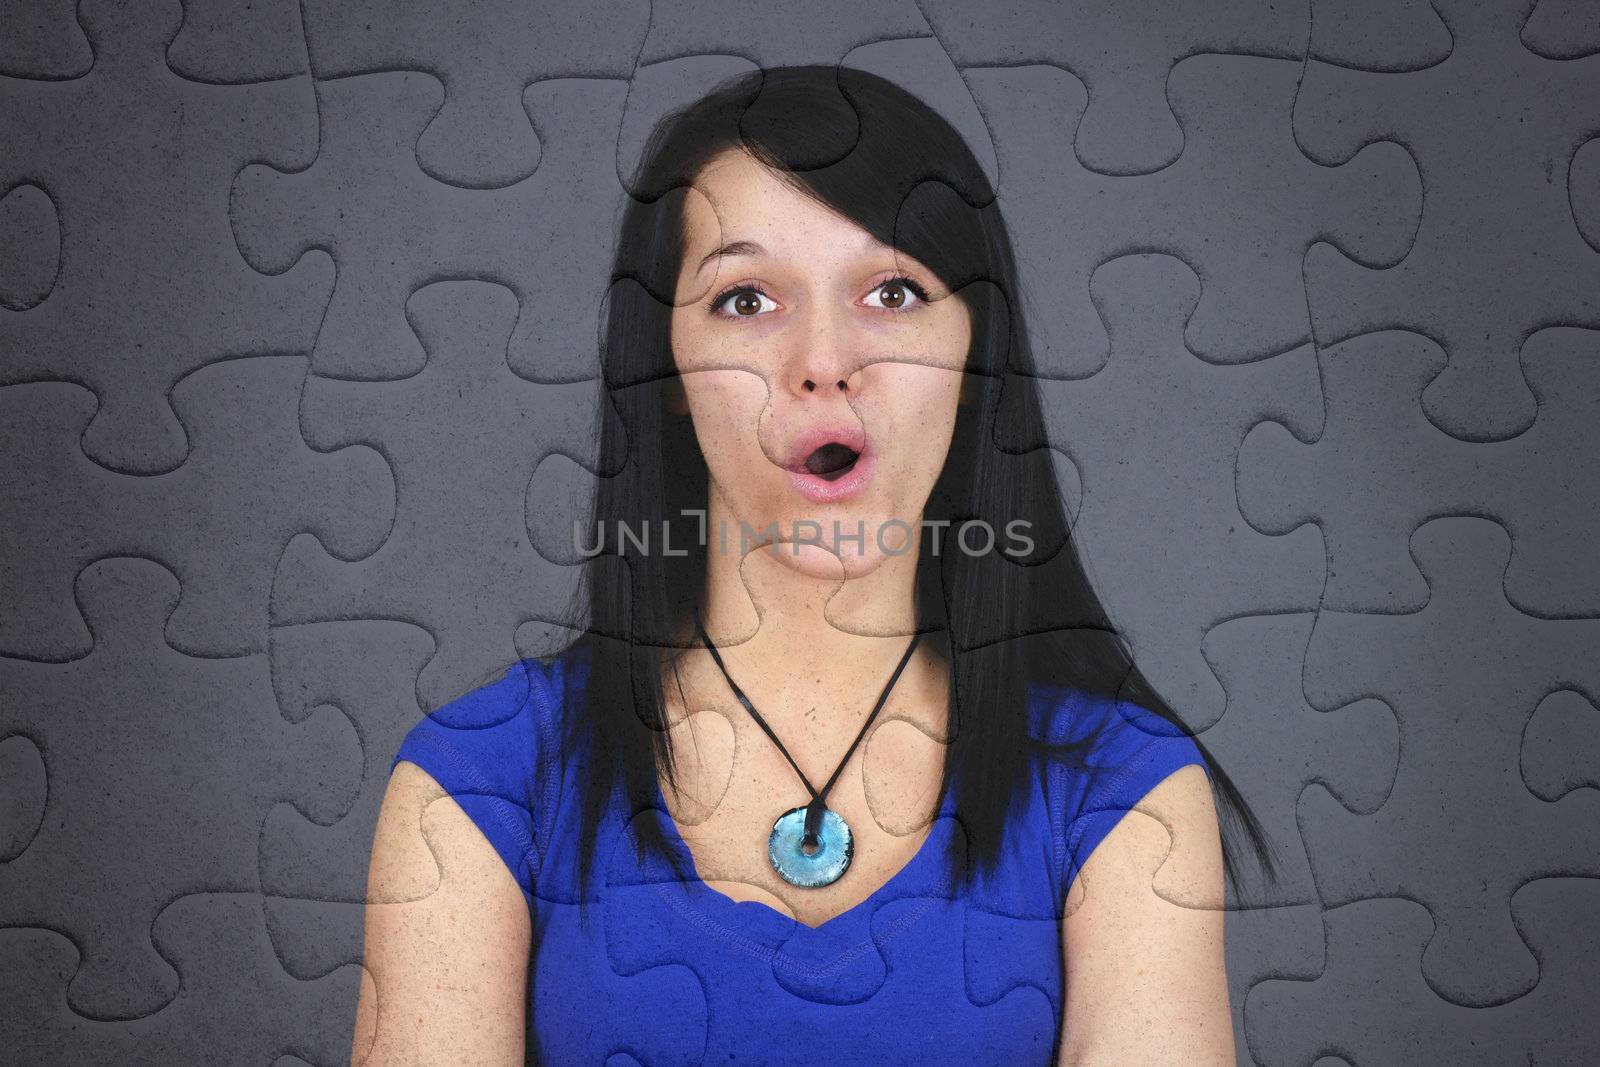 Puzzled young woman by Mirage3